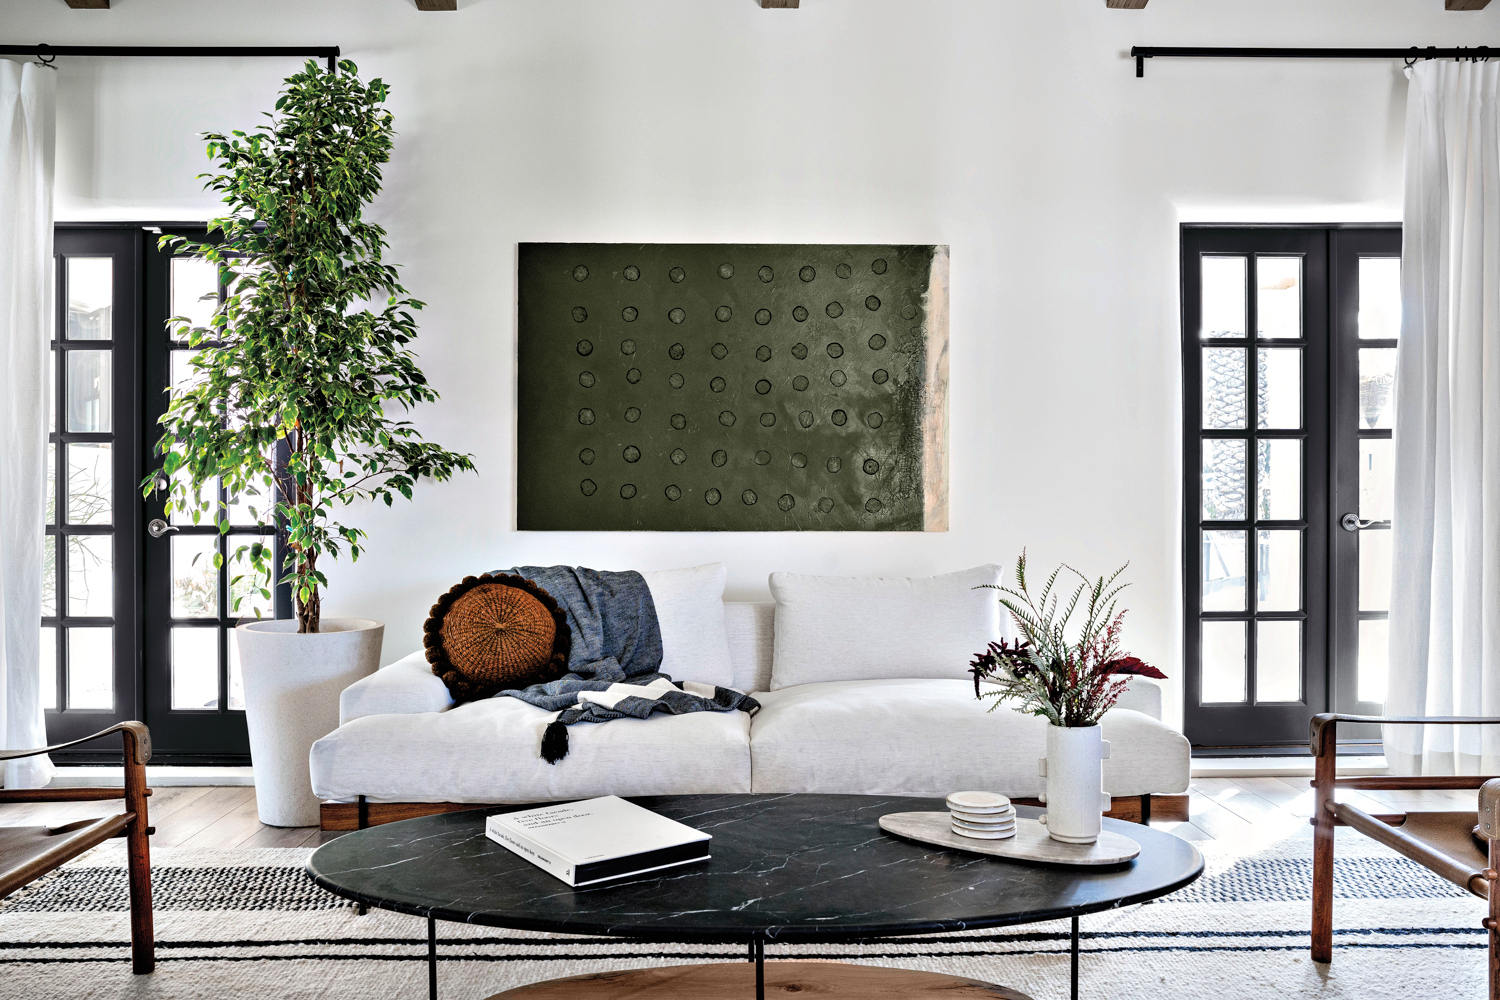 Above a white sofa hangs a deep green abstract painting. In front of it is a black-marble-and-wood coffee table.